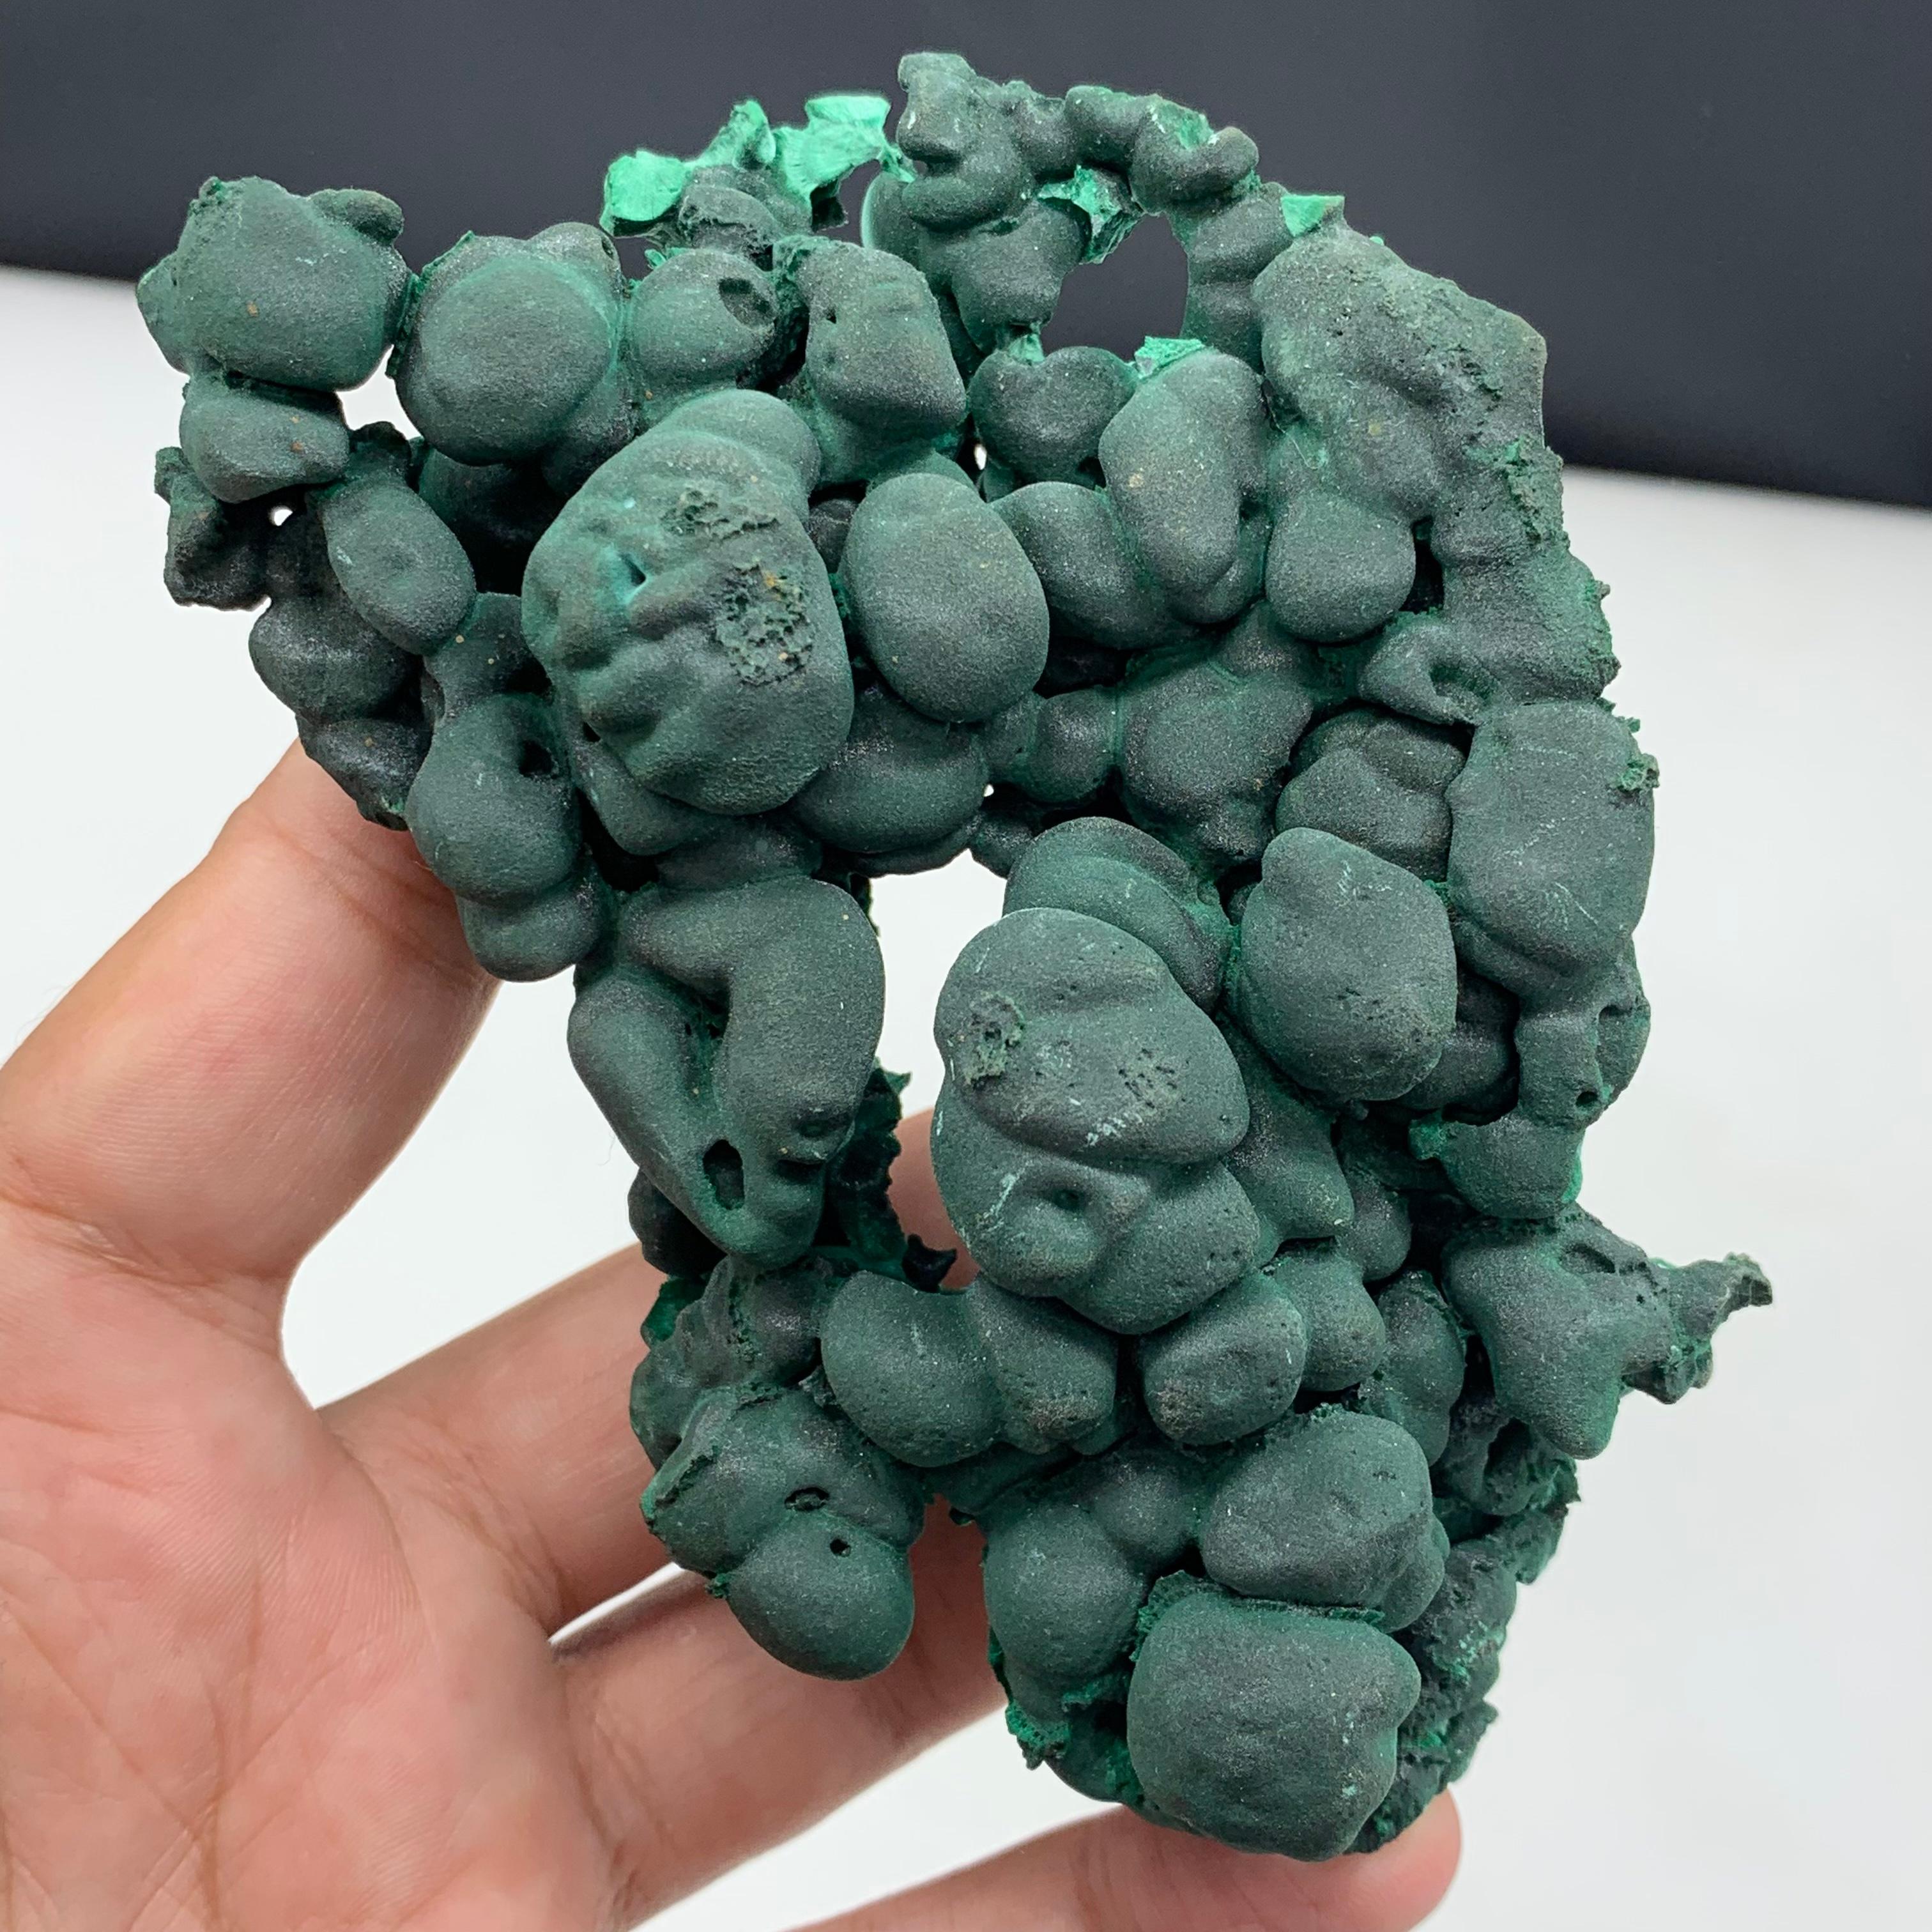 291 Gram Incredible Alien Eye Malachite Cluster Specimen From Guangdong, China  For Sale 5